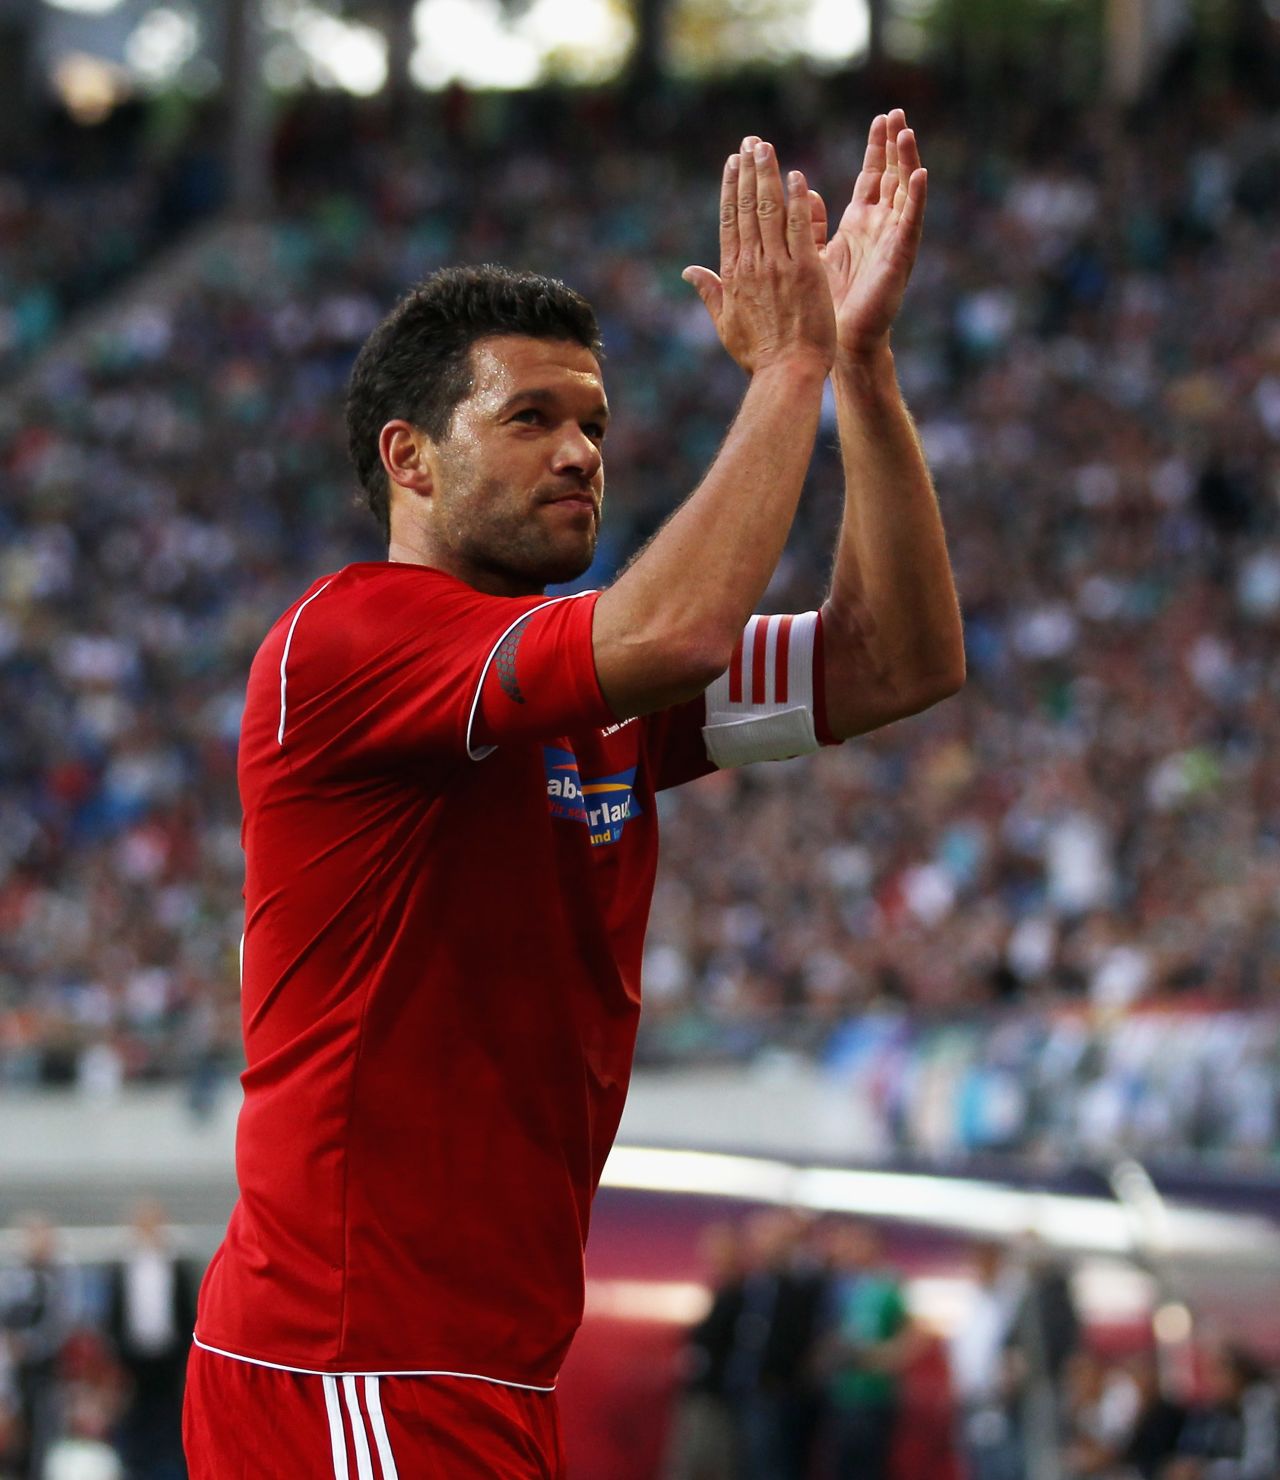 A capacity 44,000 crowd attended the game between a World XI and a Germany XI to salute Ballack's career which saw him play for Kaiserslautern, Bayer Leverkusen and Bayern Munich in Germany, and Chelsea in England.